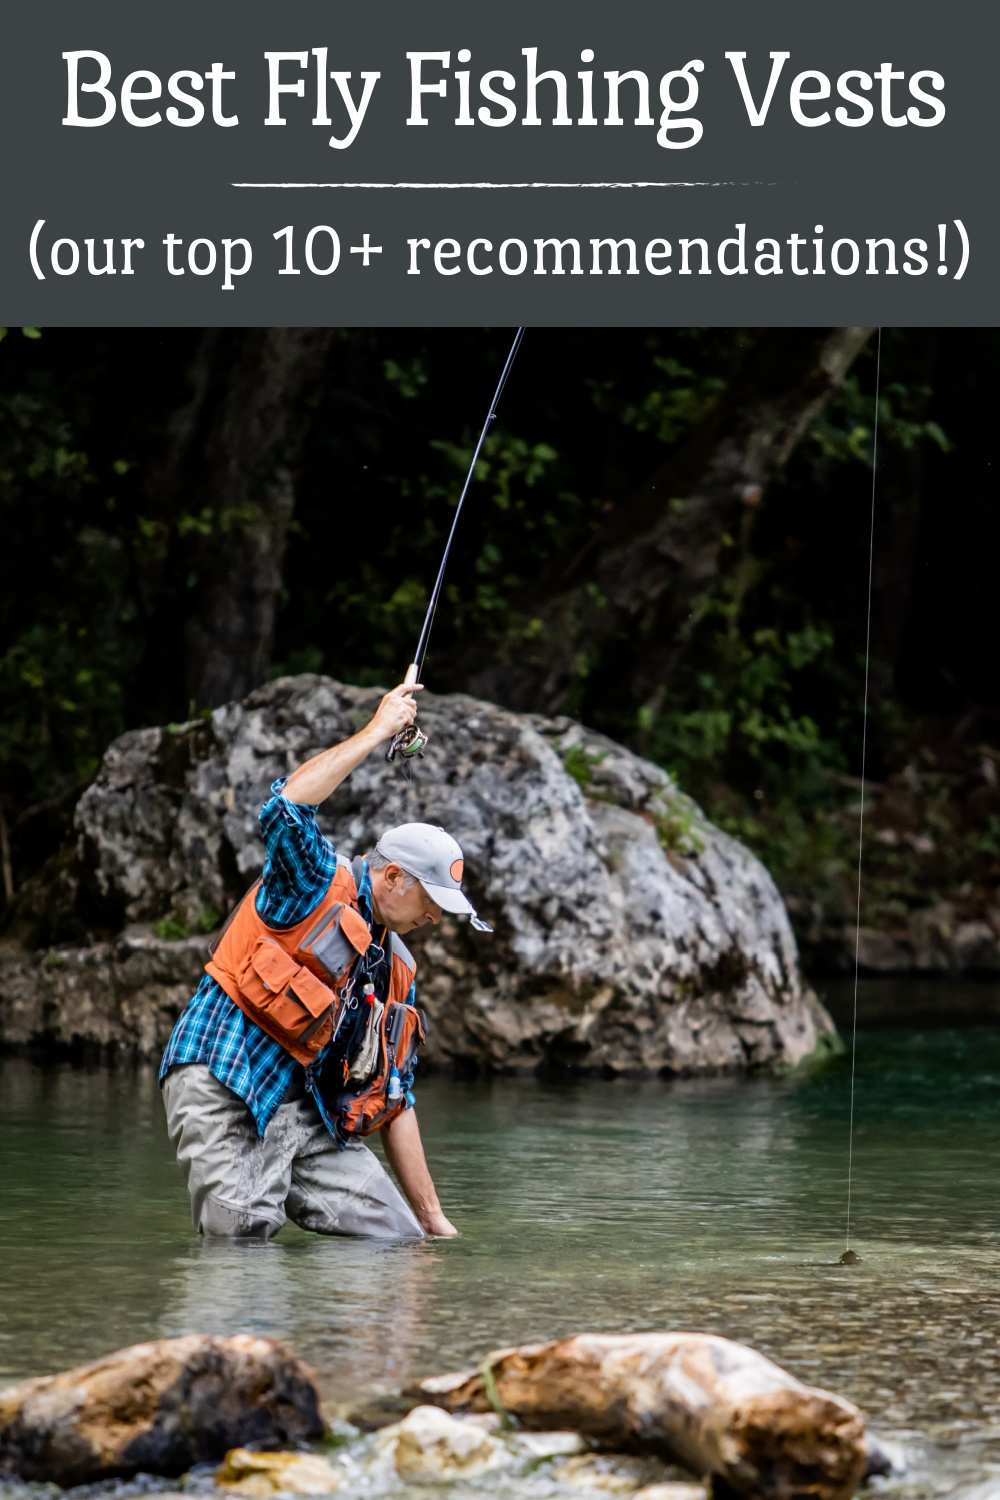 Best Fly Fishing Vests